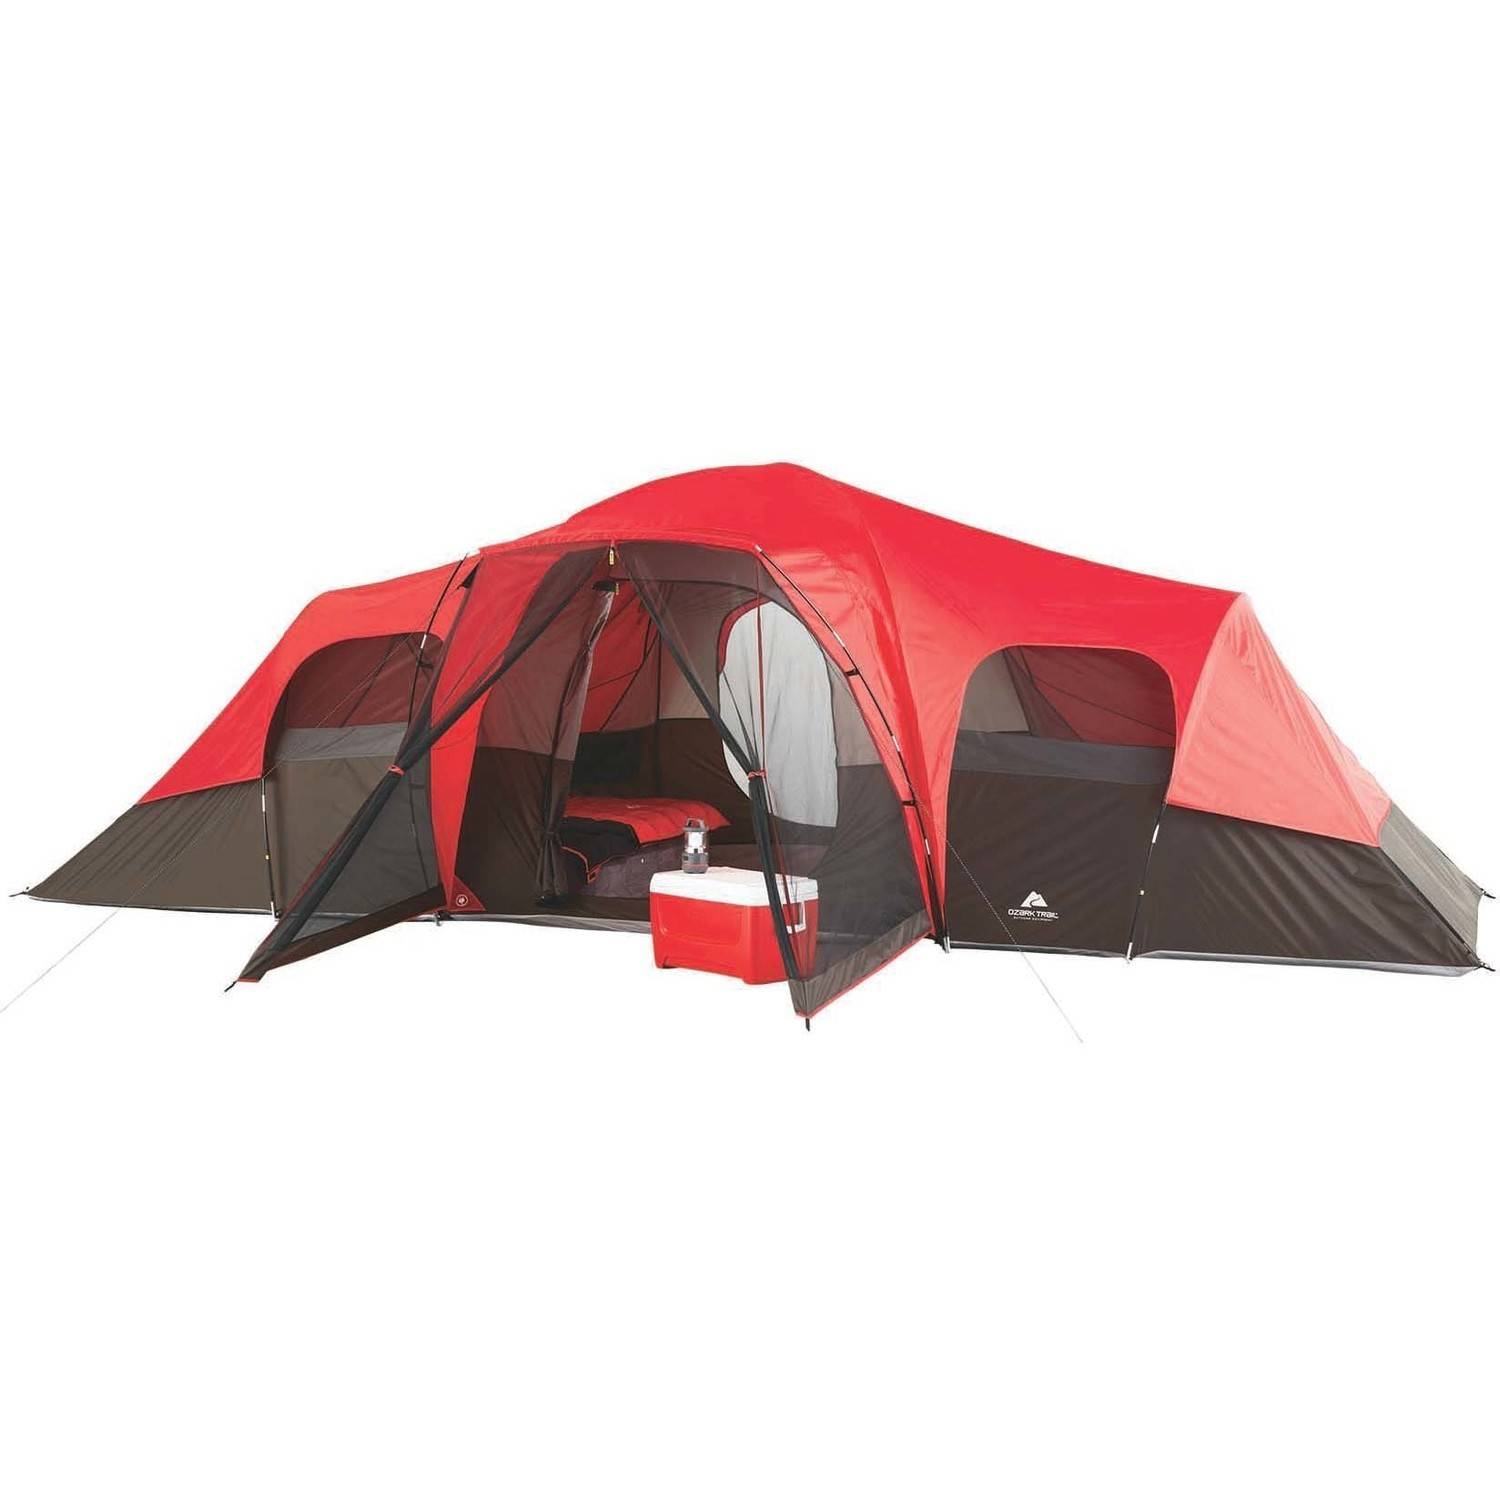 Ozark Trail 10-person family camping tent for $50